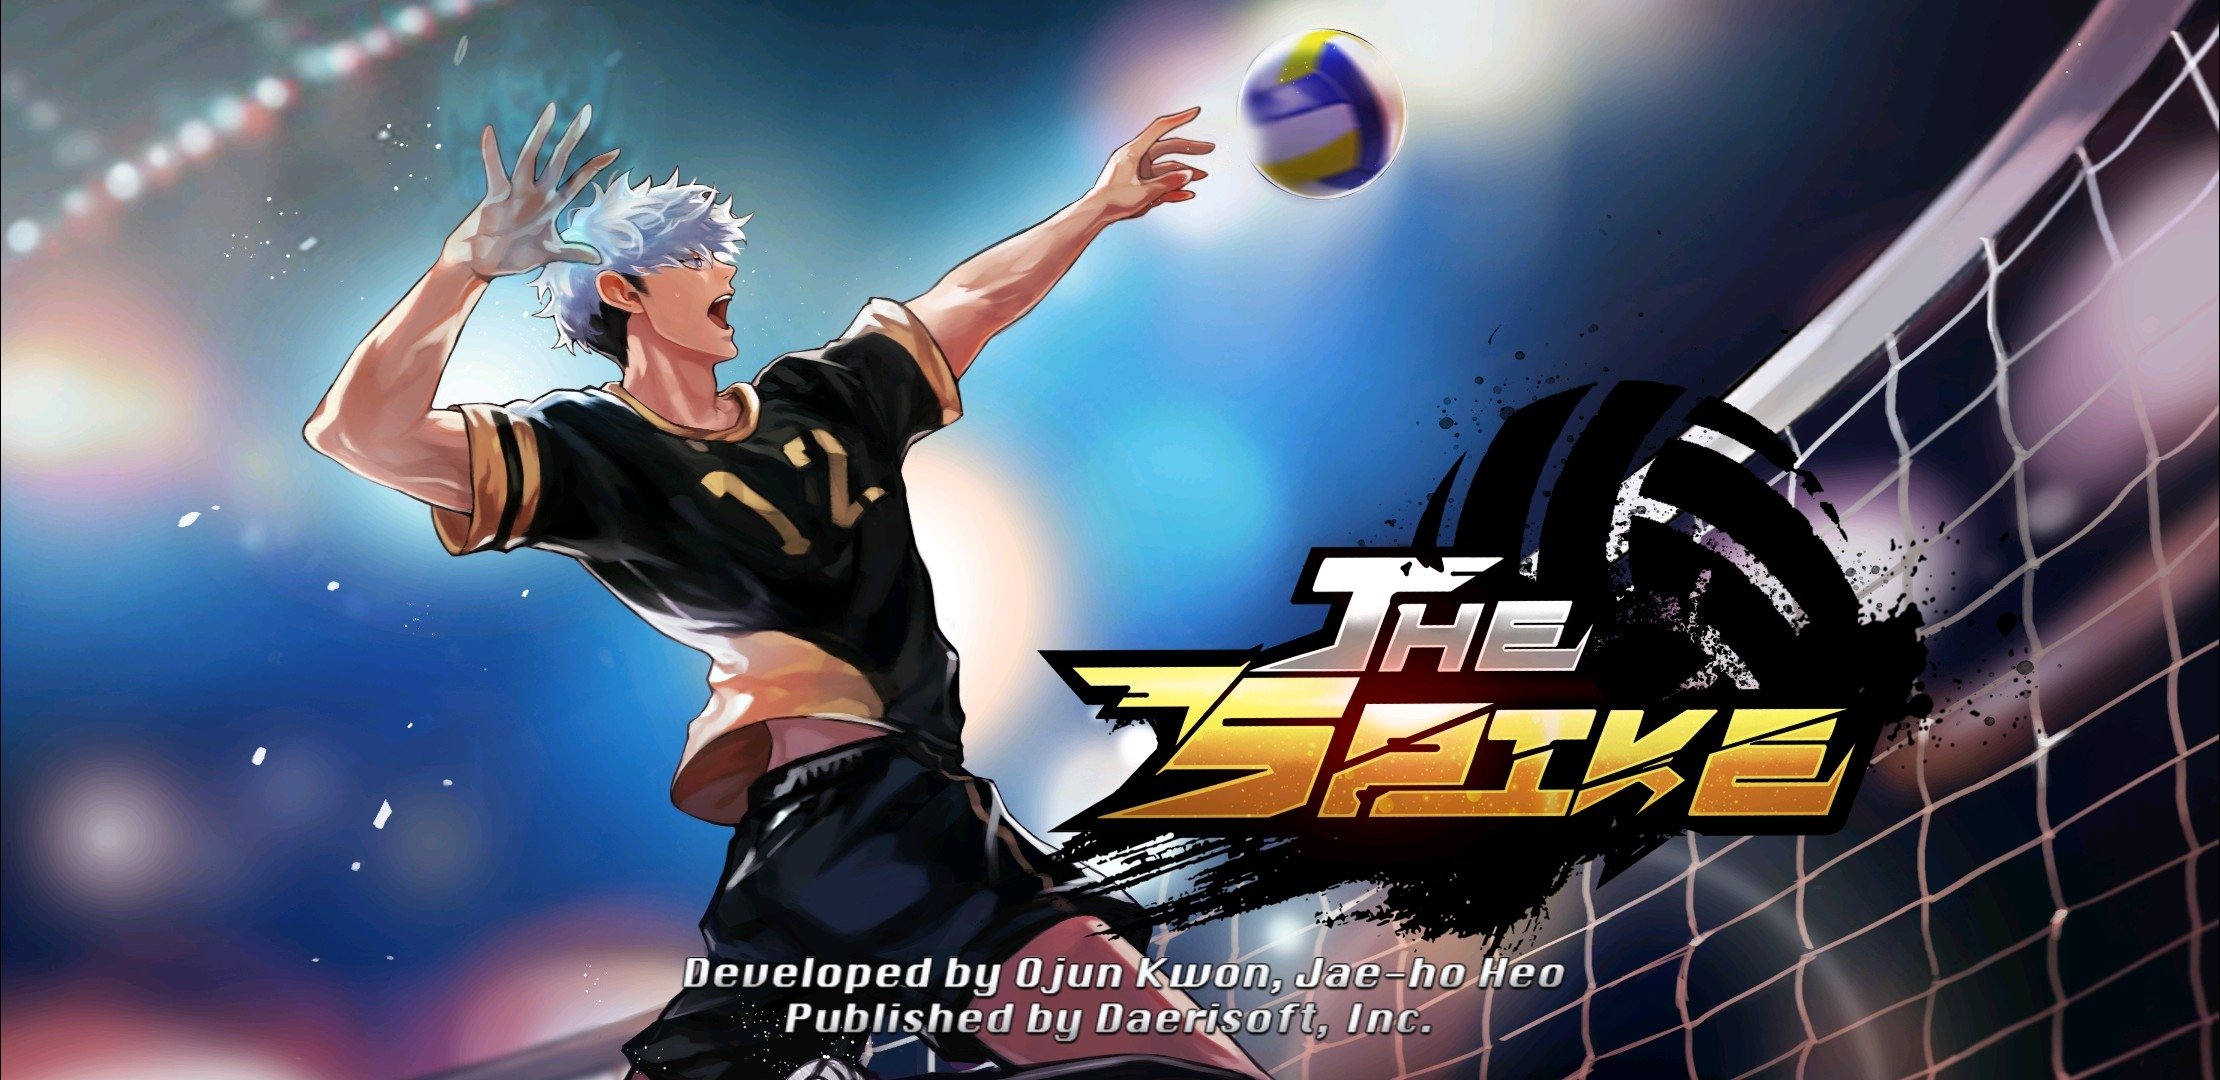 The spike volleyball story мод